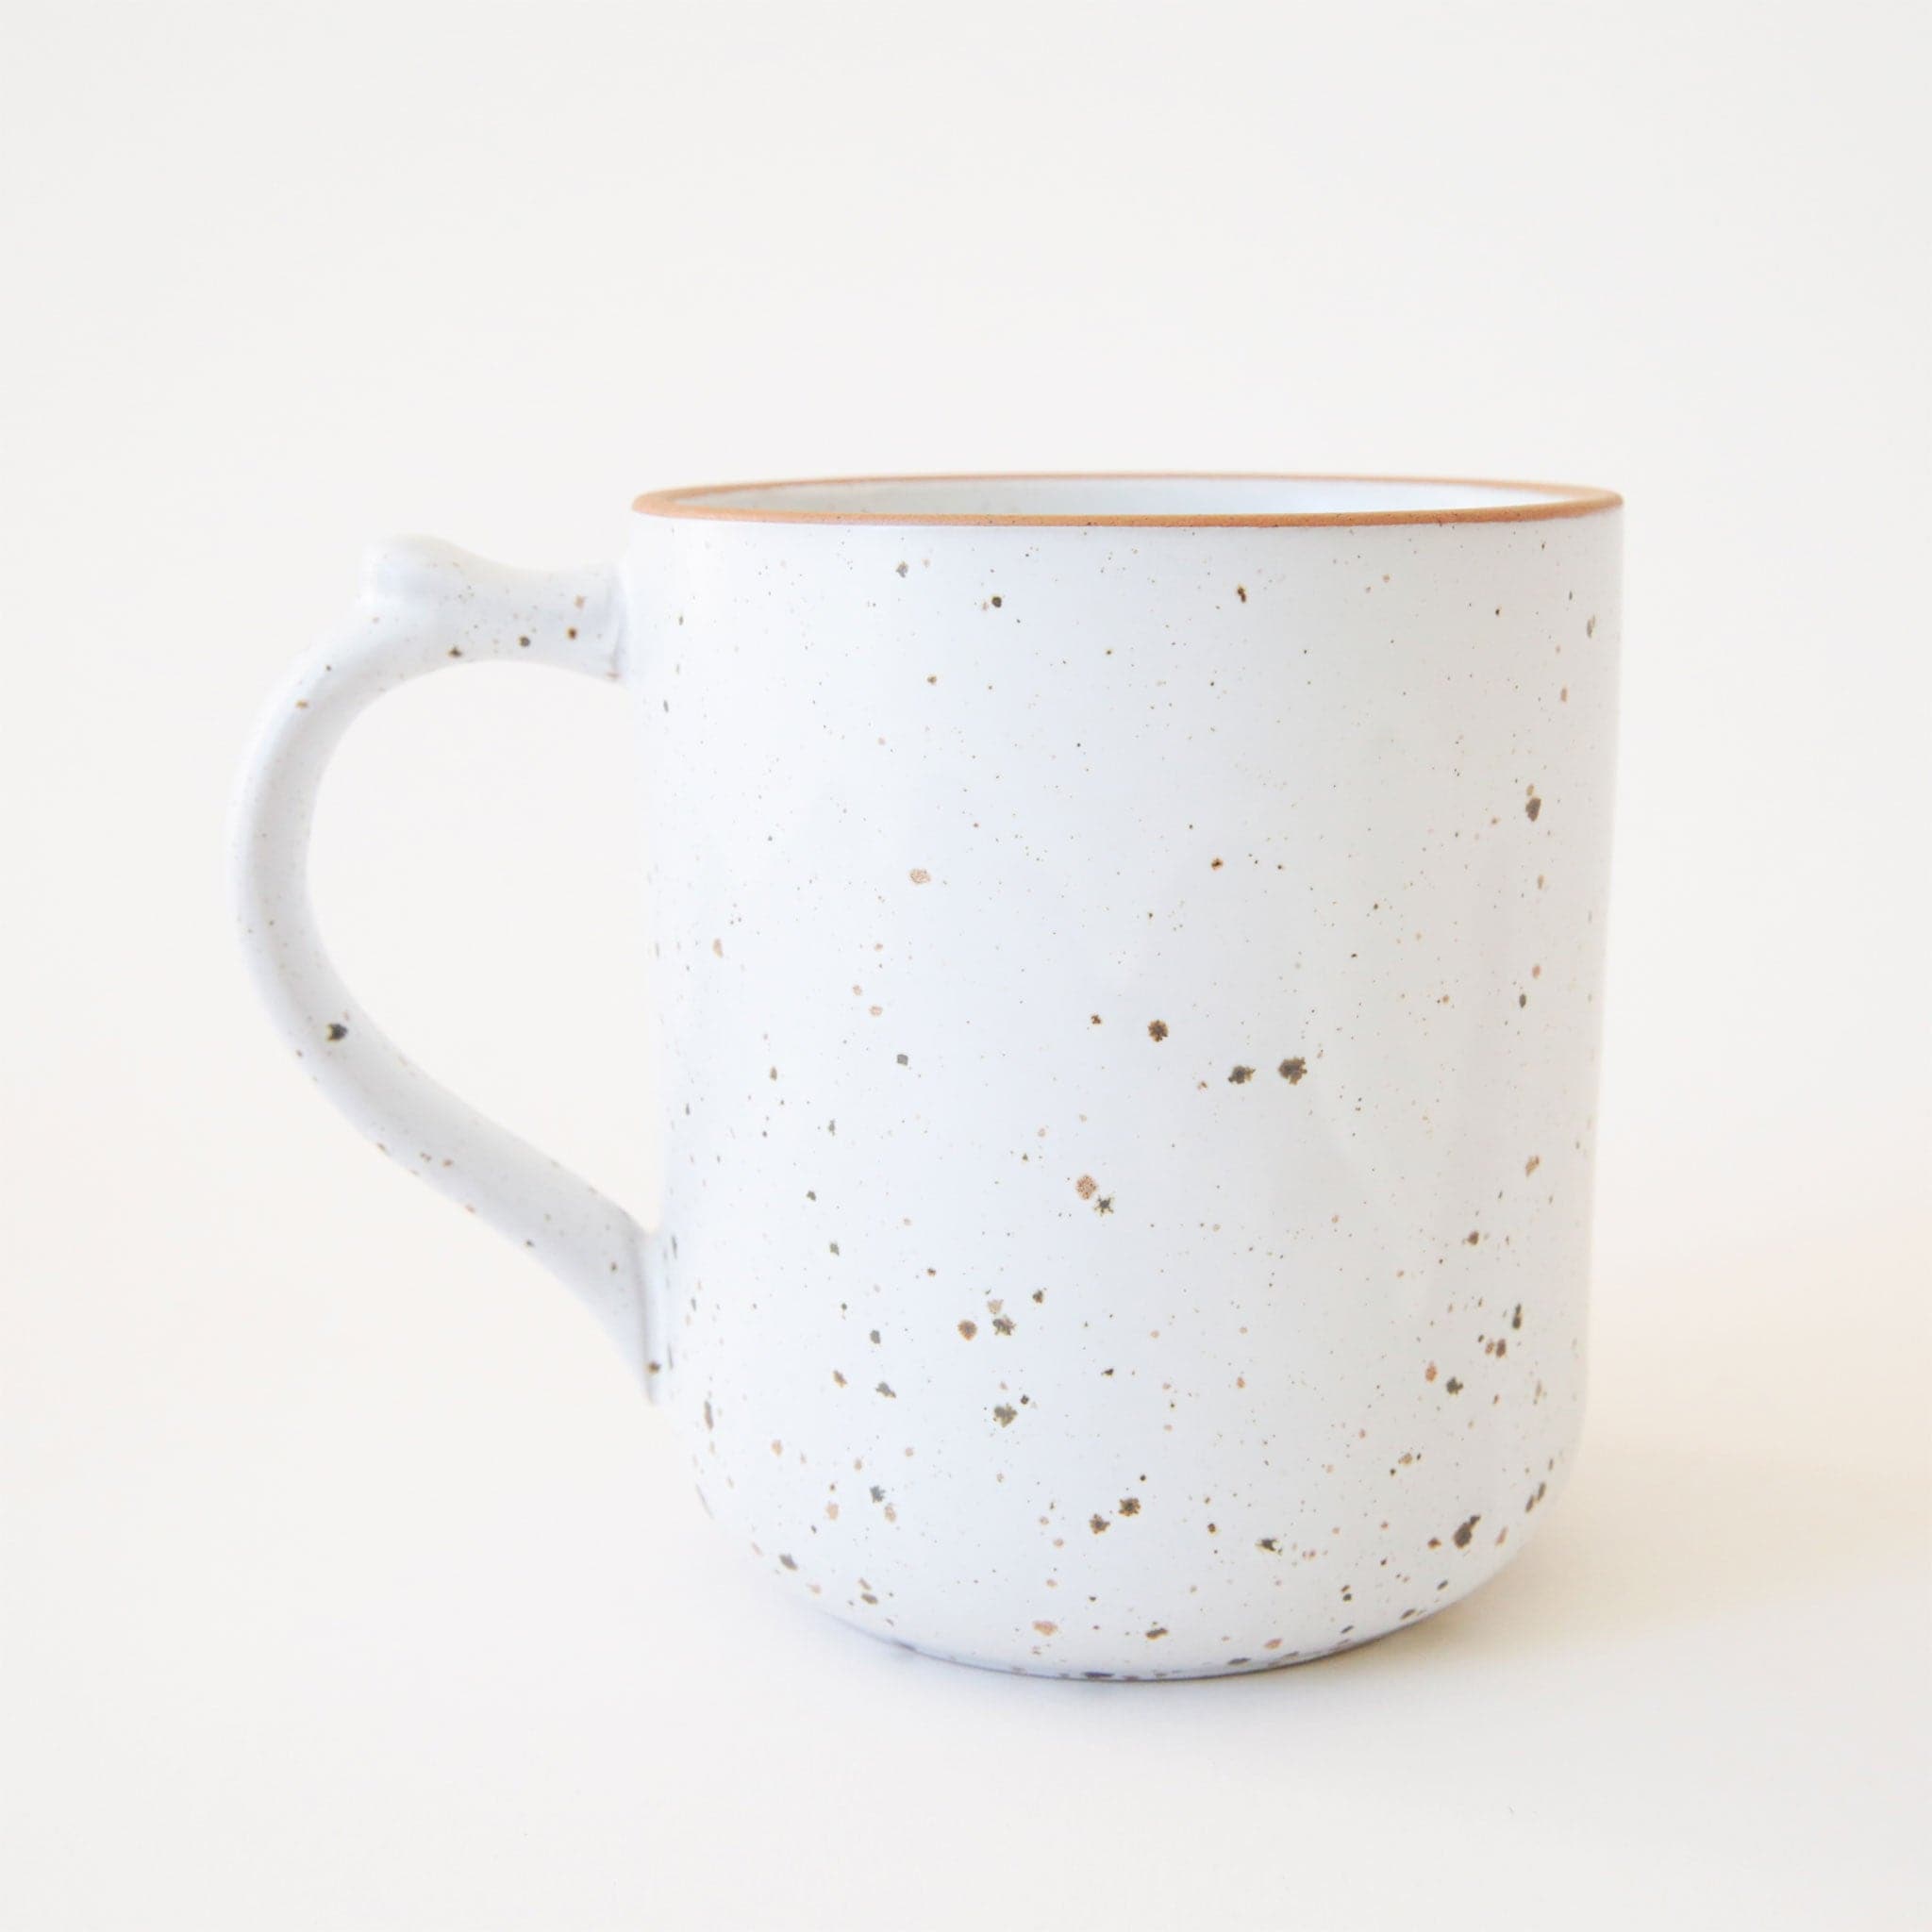 White ceramic mug with brown speckles. The mug has a curved handle with a small notch near the upper half. The top edge of the mug is lined in a caramel brown. 